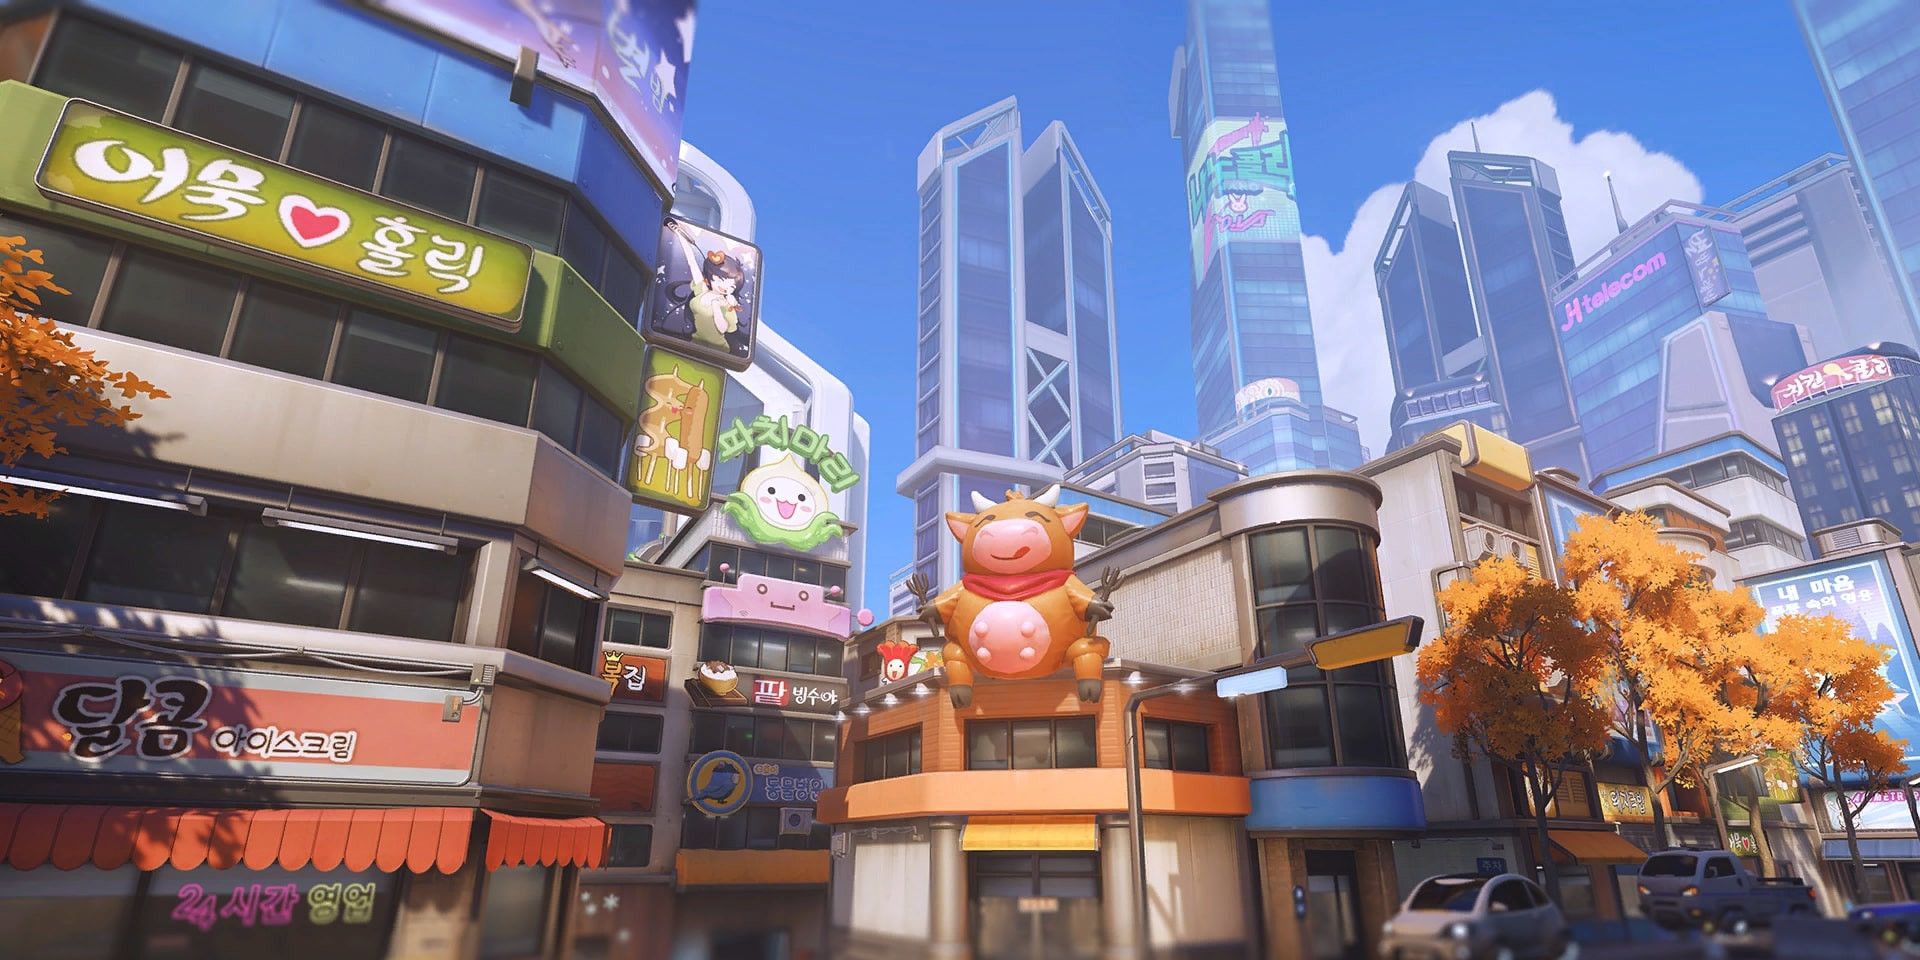 The Busan downtown in Overwatch